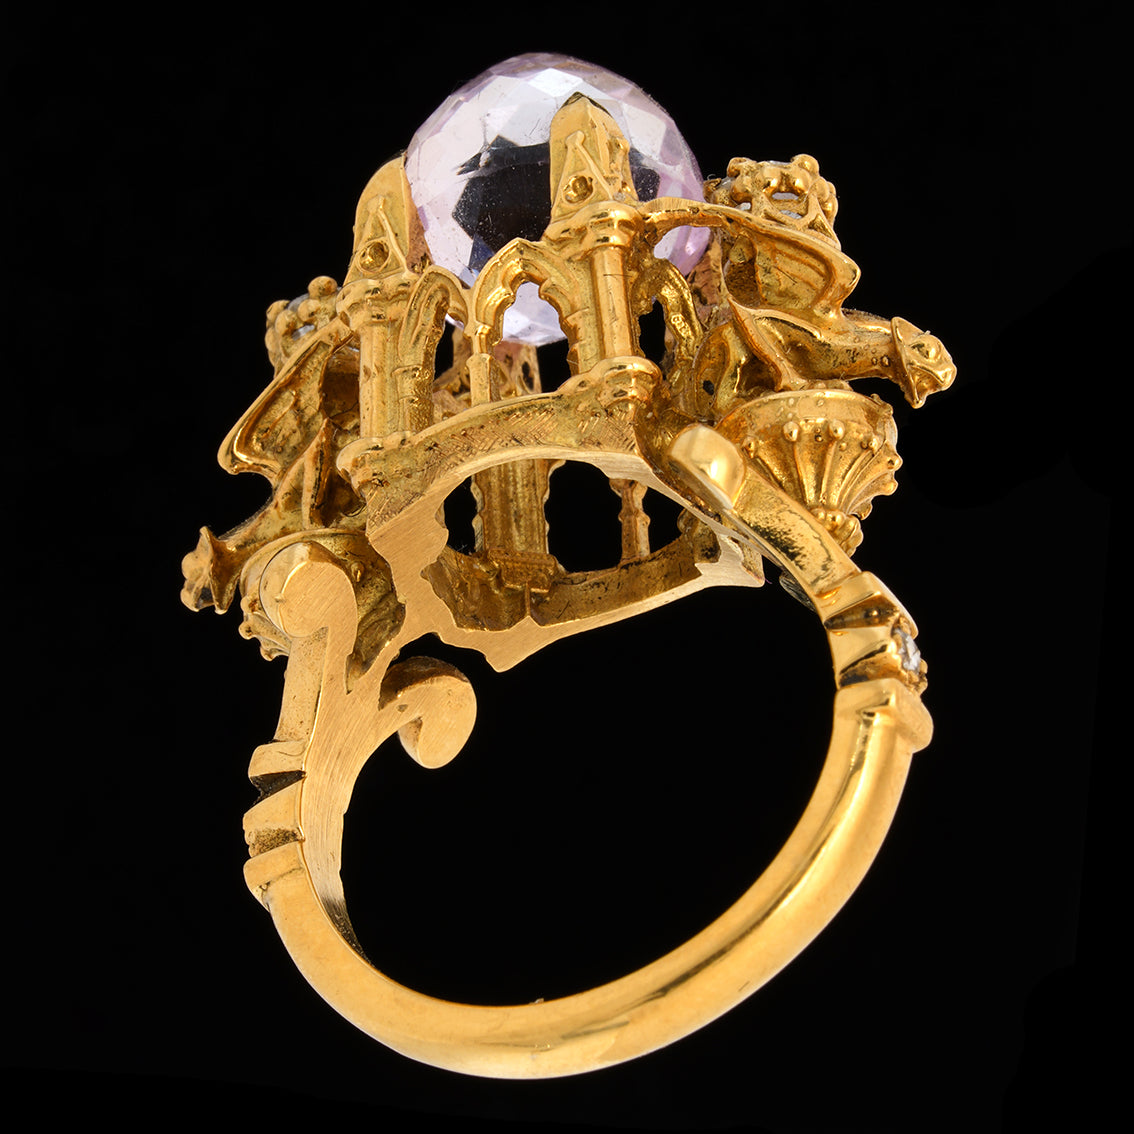 HIGHER DIVINITY RING